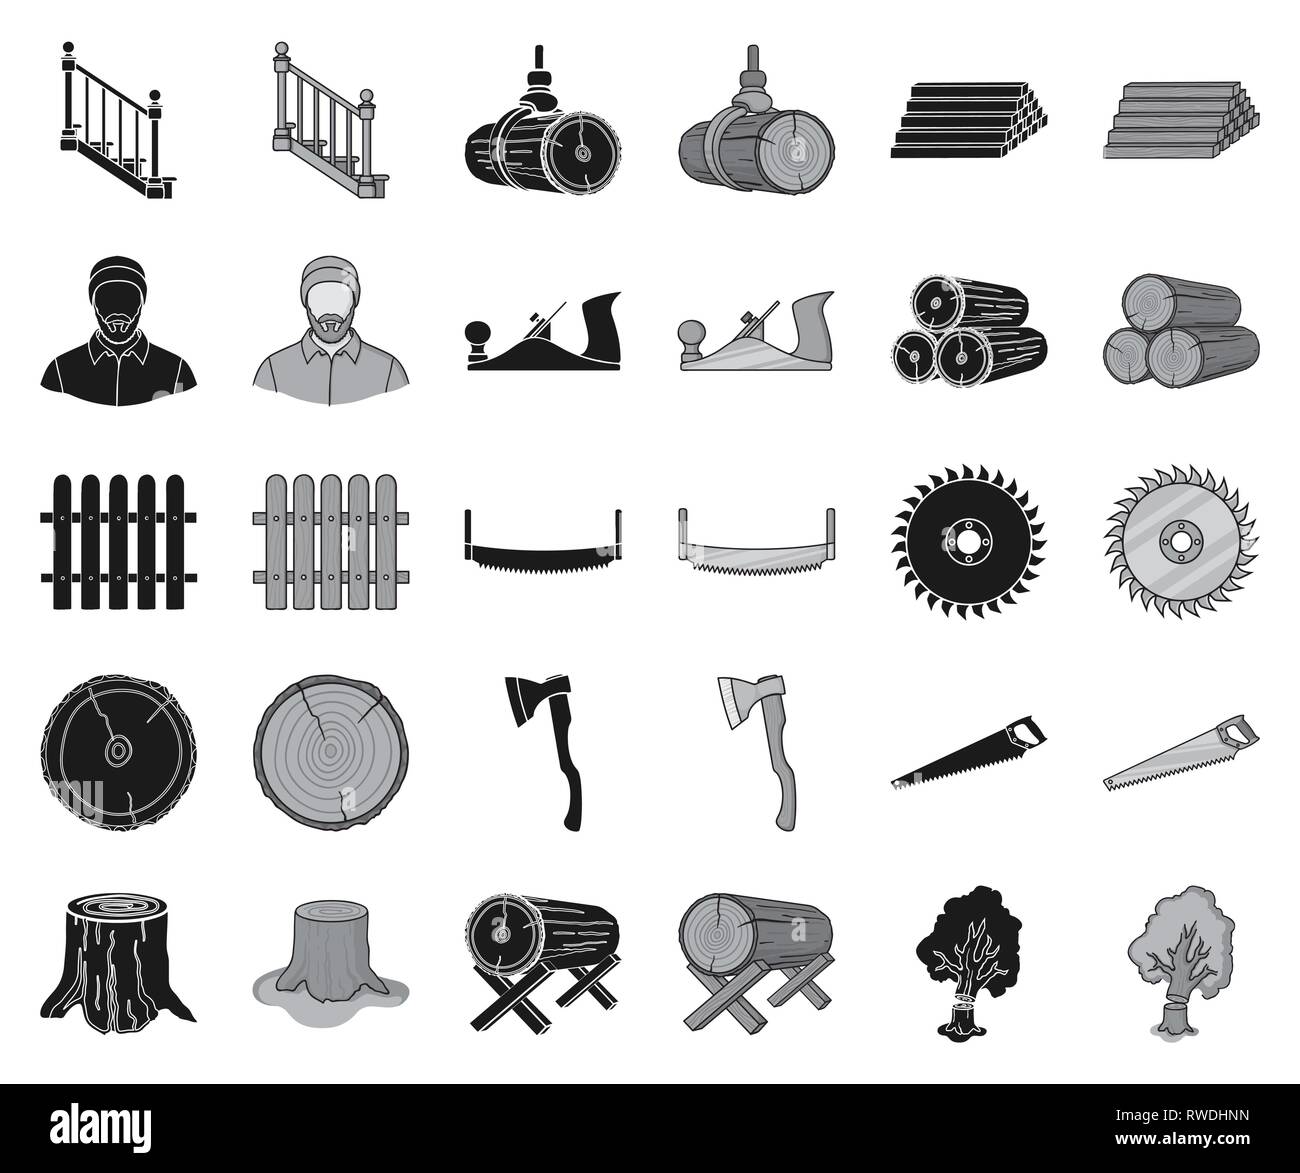 art,axe,black,monochrome,chisel,collection,crane,cross,design,disc,equipment,falling,fence,goats,hand,hydraulic,icon,illustration,isolated,jack,logo,logs,lumber,lumbers,lumbrejack,plane,processing,product,production,saw,sawing,sawmill,section,set,sign,stack,stairs,stump,symbol,timber,tools,tree,two-man,vector,web Vector Vectors , Stock Vector